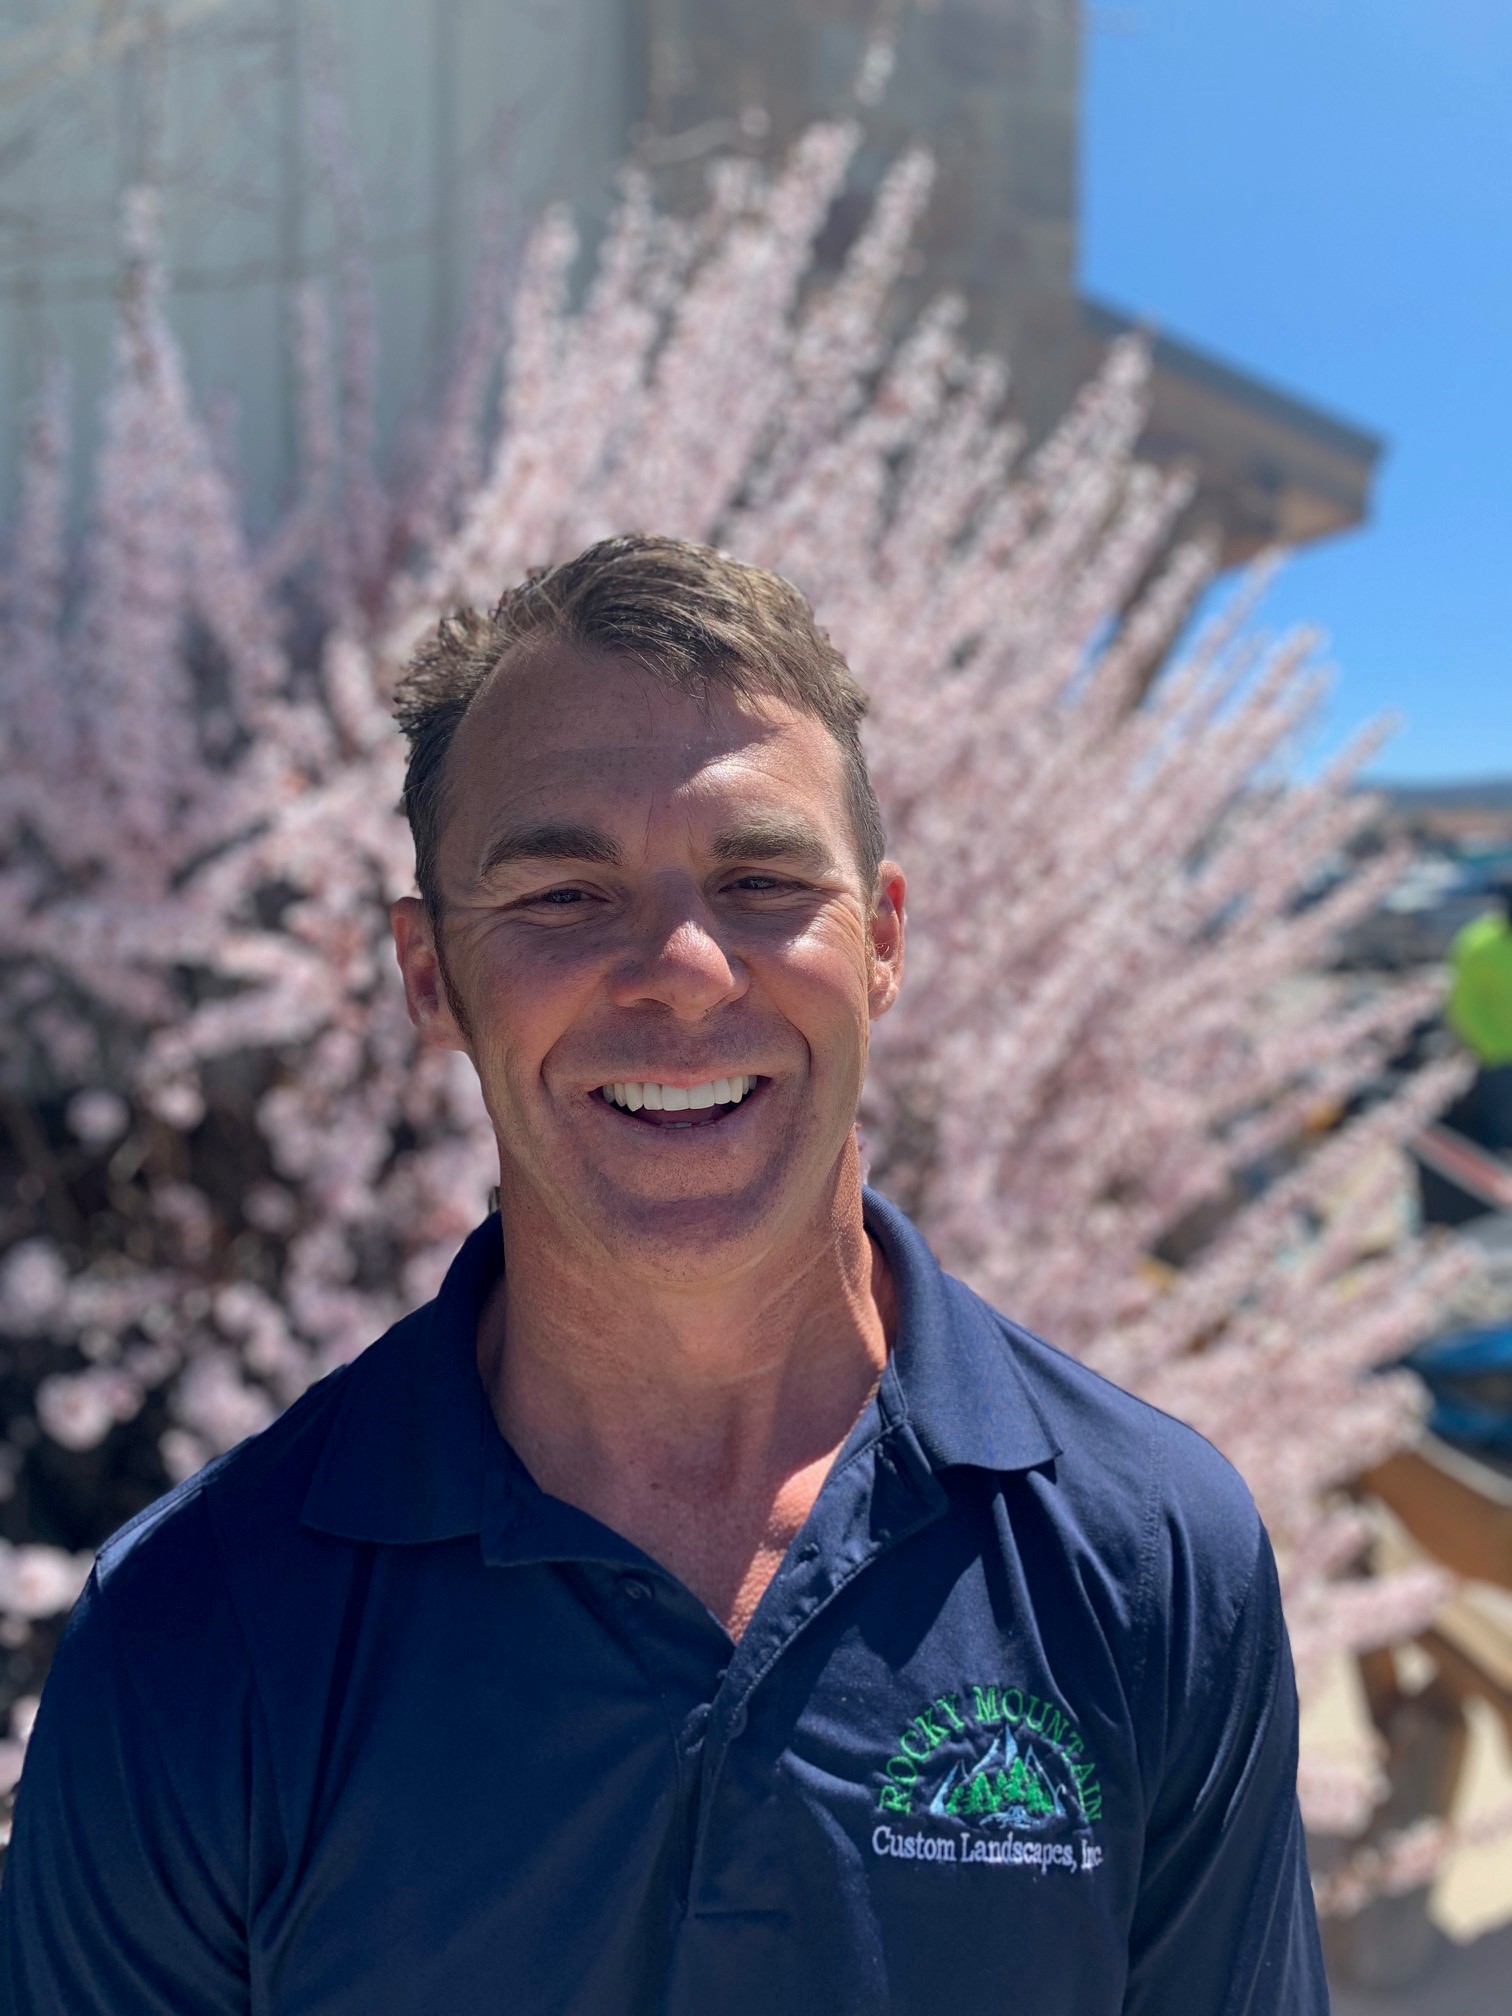 A smiling person stands in front of pink-blossomed trees, wearing a dark polo with an embroidered logo, on a sunny day.